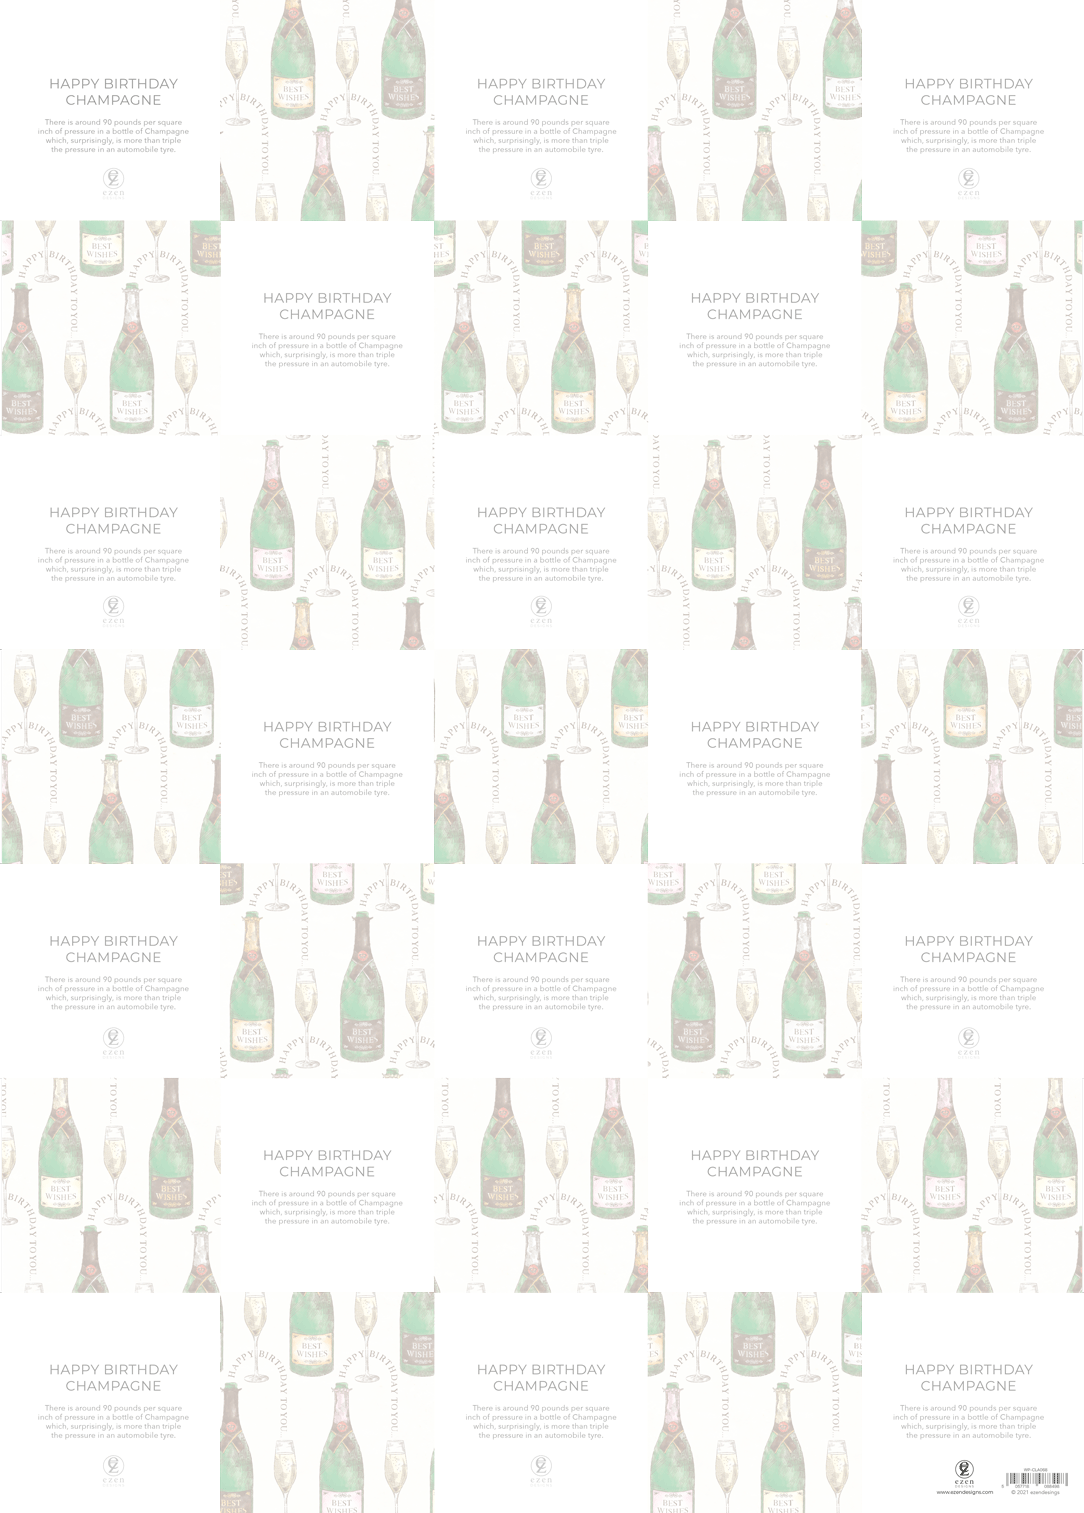 HAPPY BIRTHDAY CHAMPAGNE: Wrapping Paper